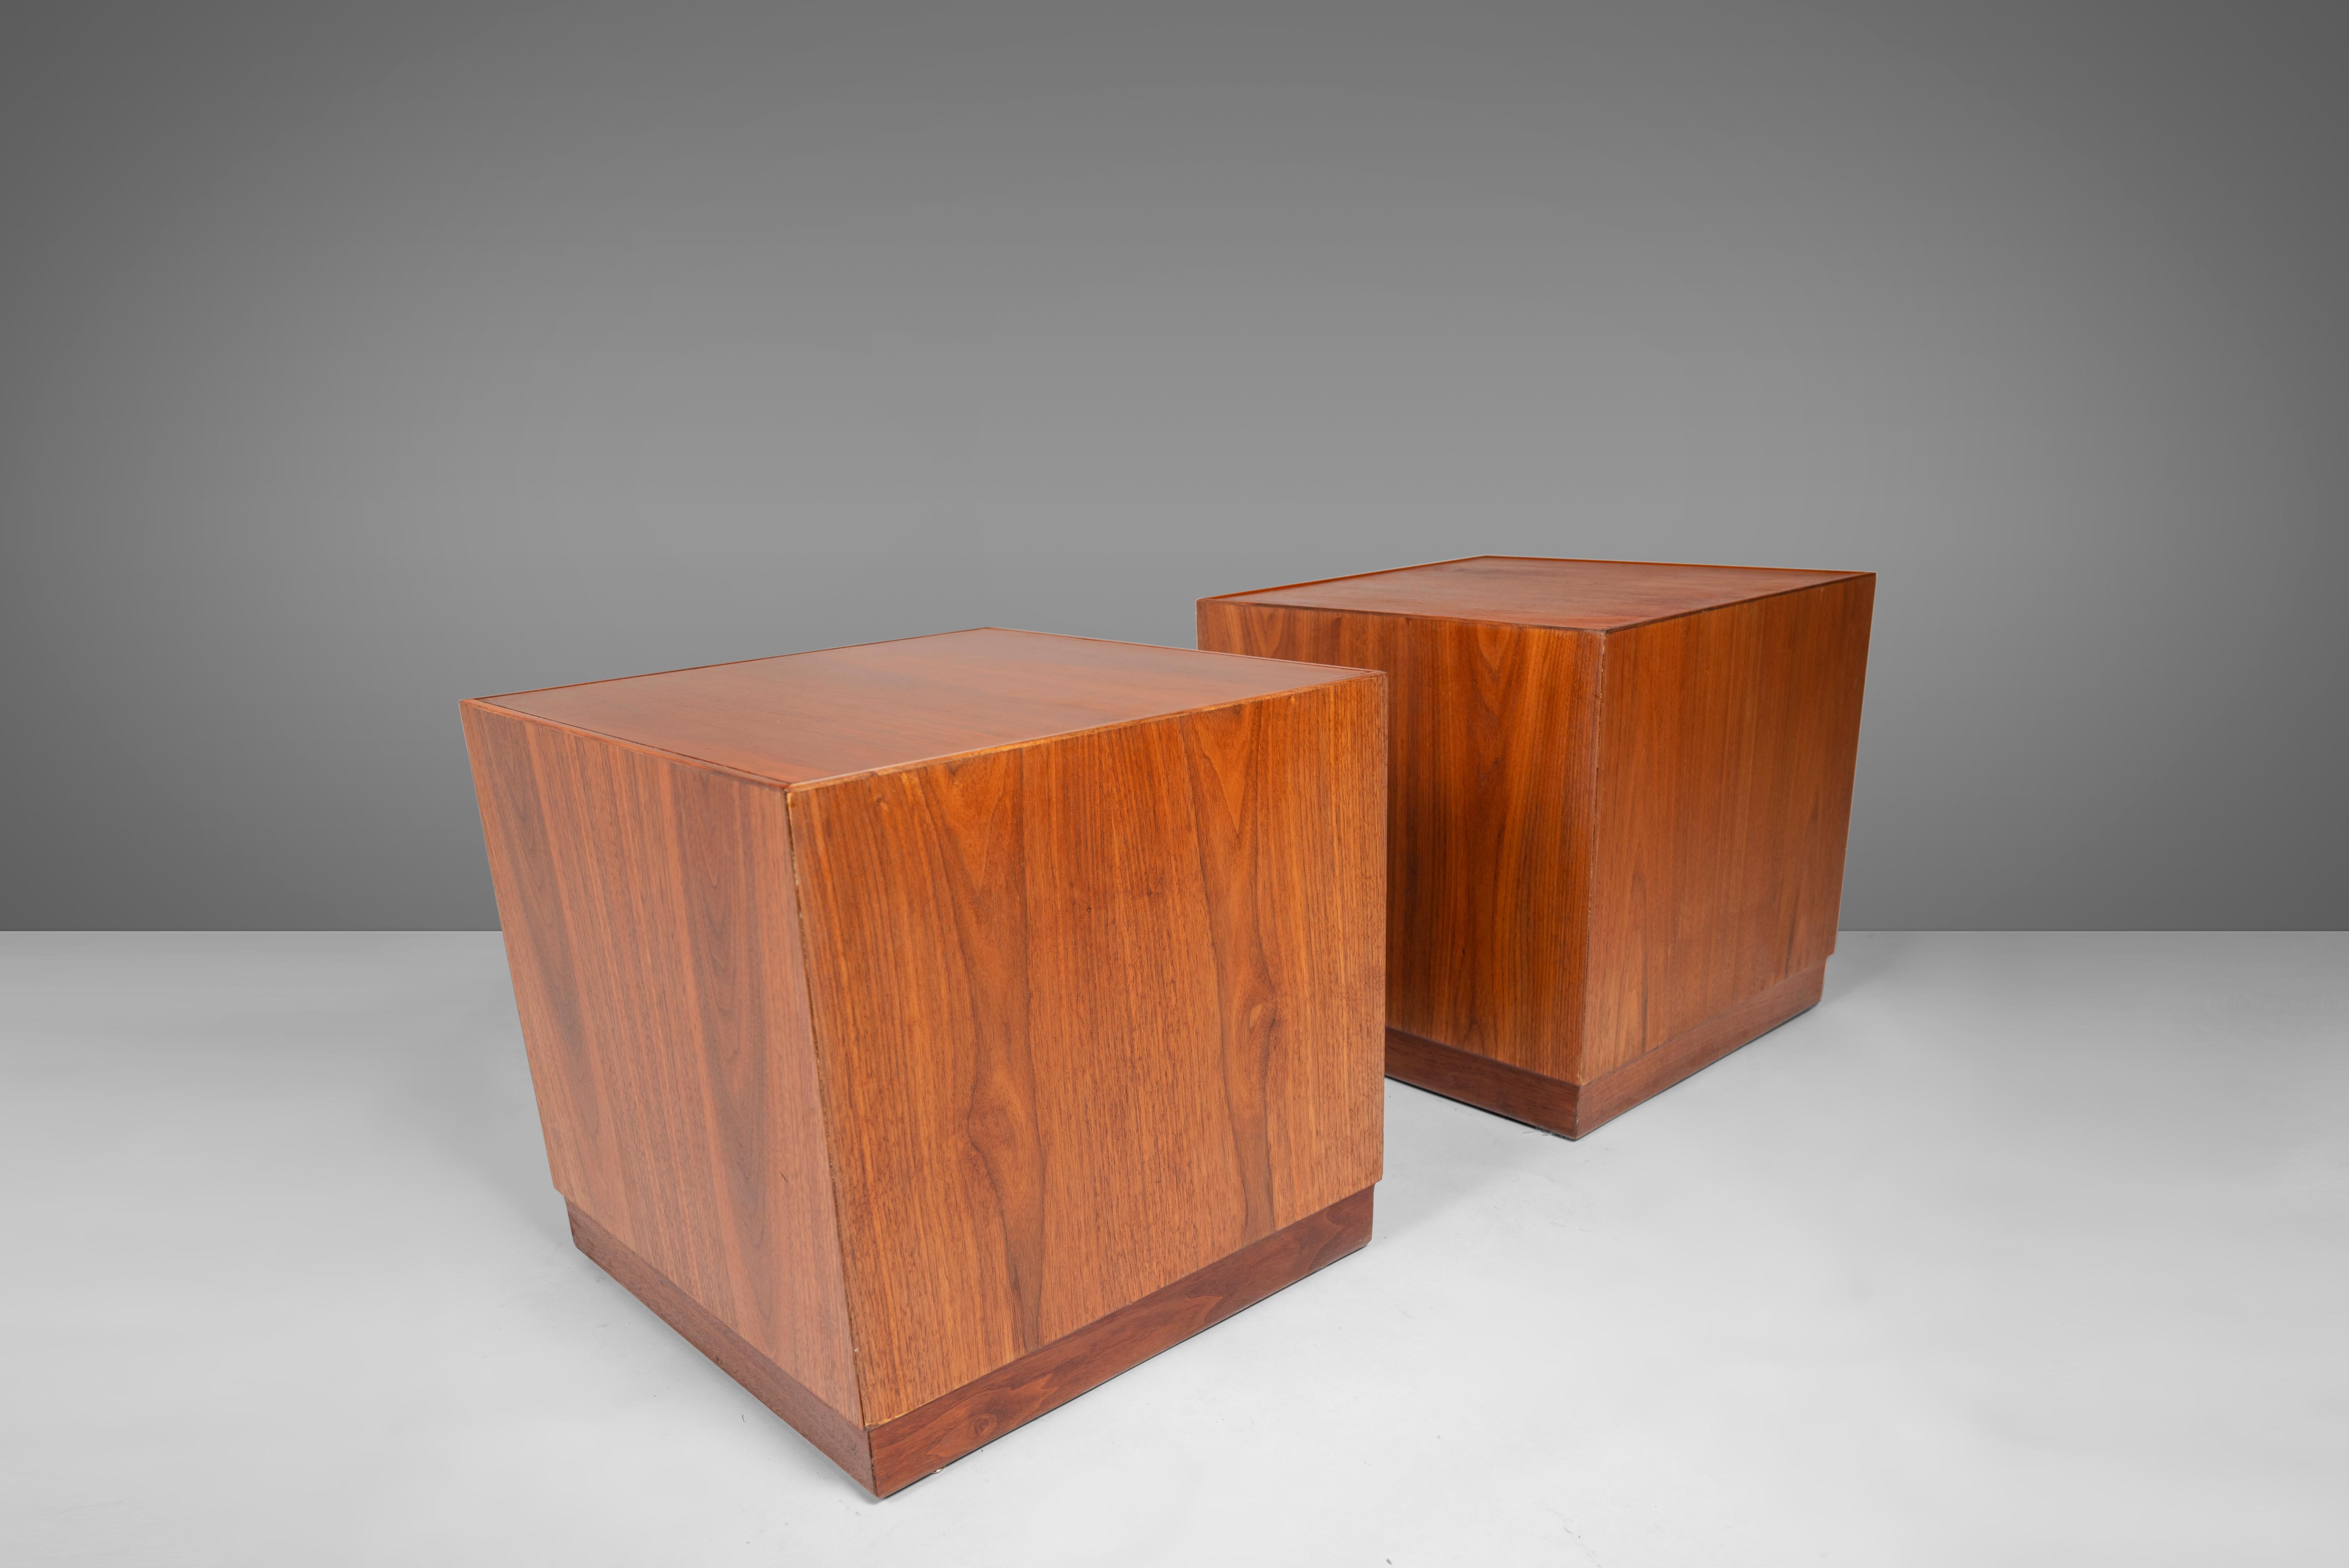 An exceptional pair of newly restored, striking flame-grained walnut cube side tables / end tables. Circa 1965.
